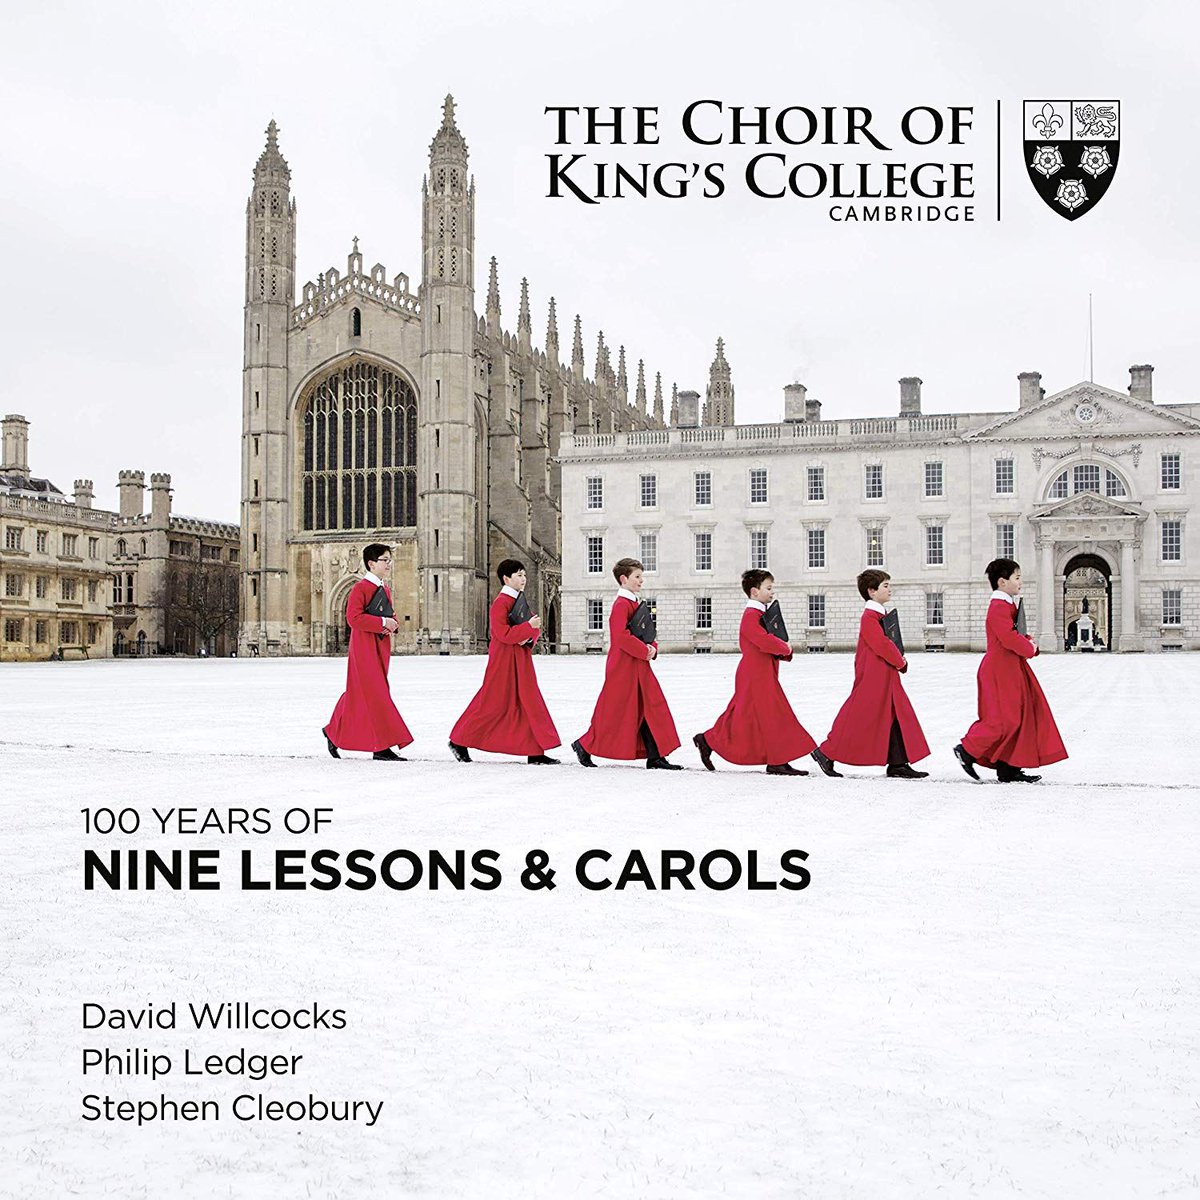 With Christmas fast approaching, @JohnSuchet1 has an Album of the week to put you in the festive spirit – @ChoirOfKingsCam's new album '100 Years of Nine Lessons & Carols'